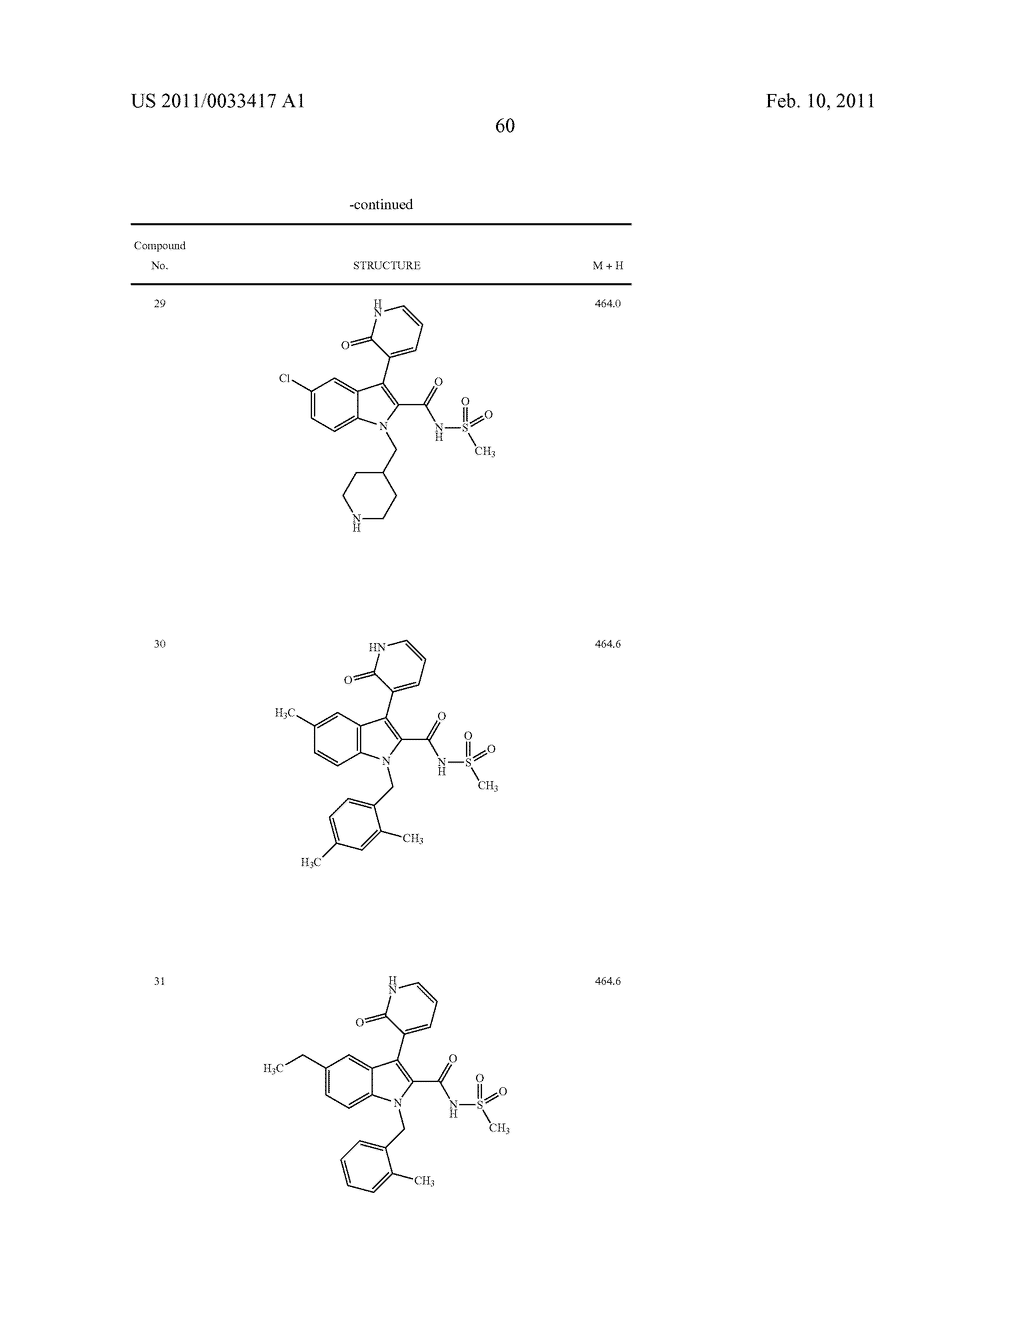 2,3-SUBSTITUTED INDOLE DERIVATIVES FOR TREATING VIRAL INFECTIONS - diagram, schematic, and image 61